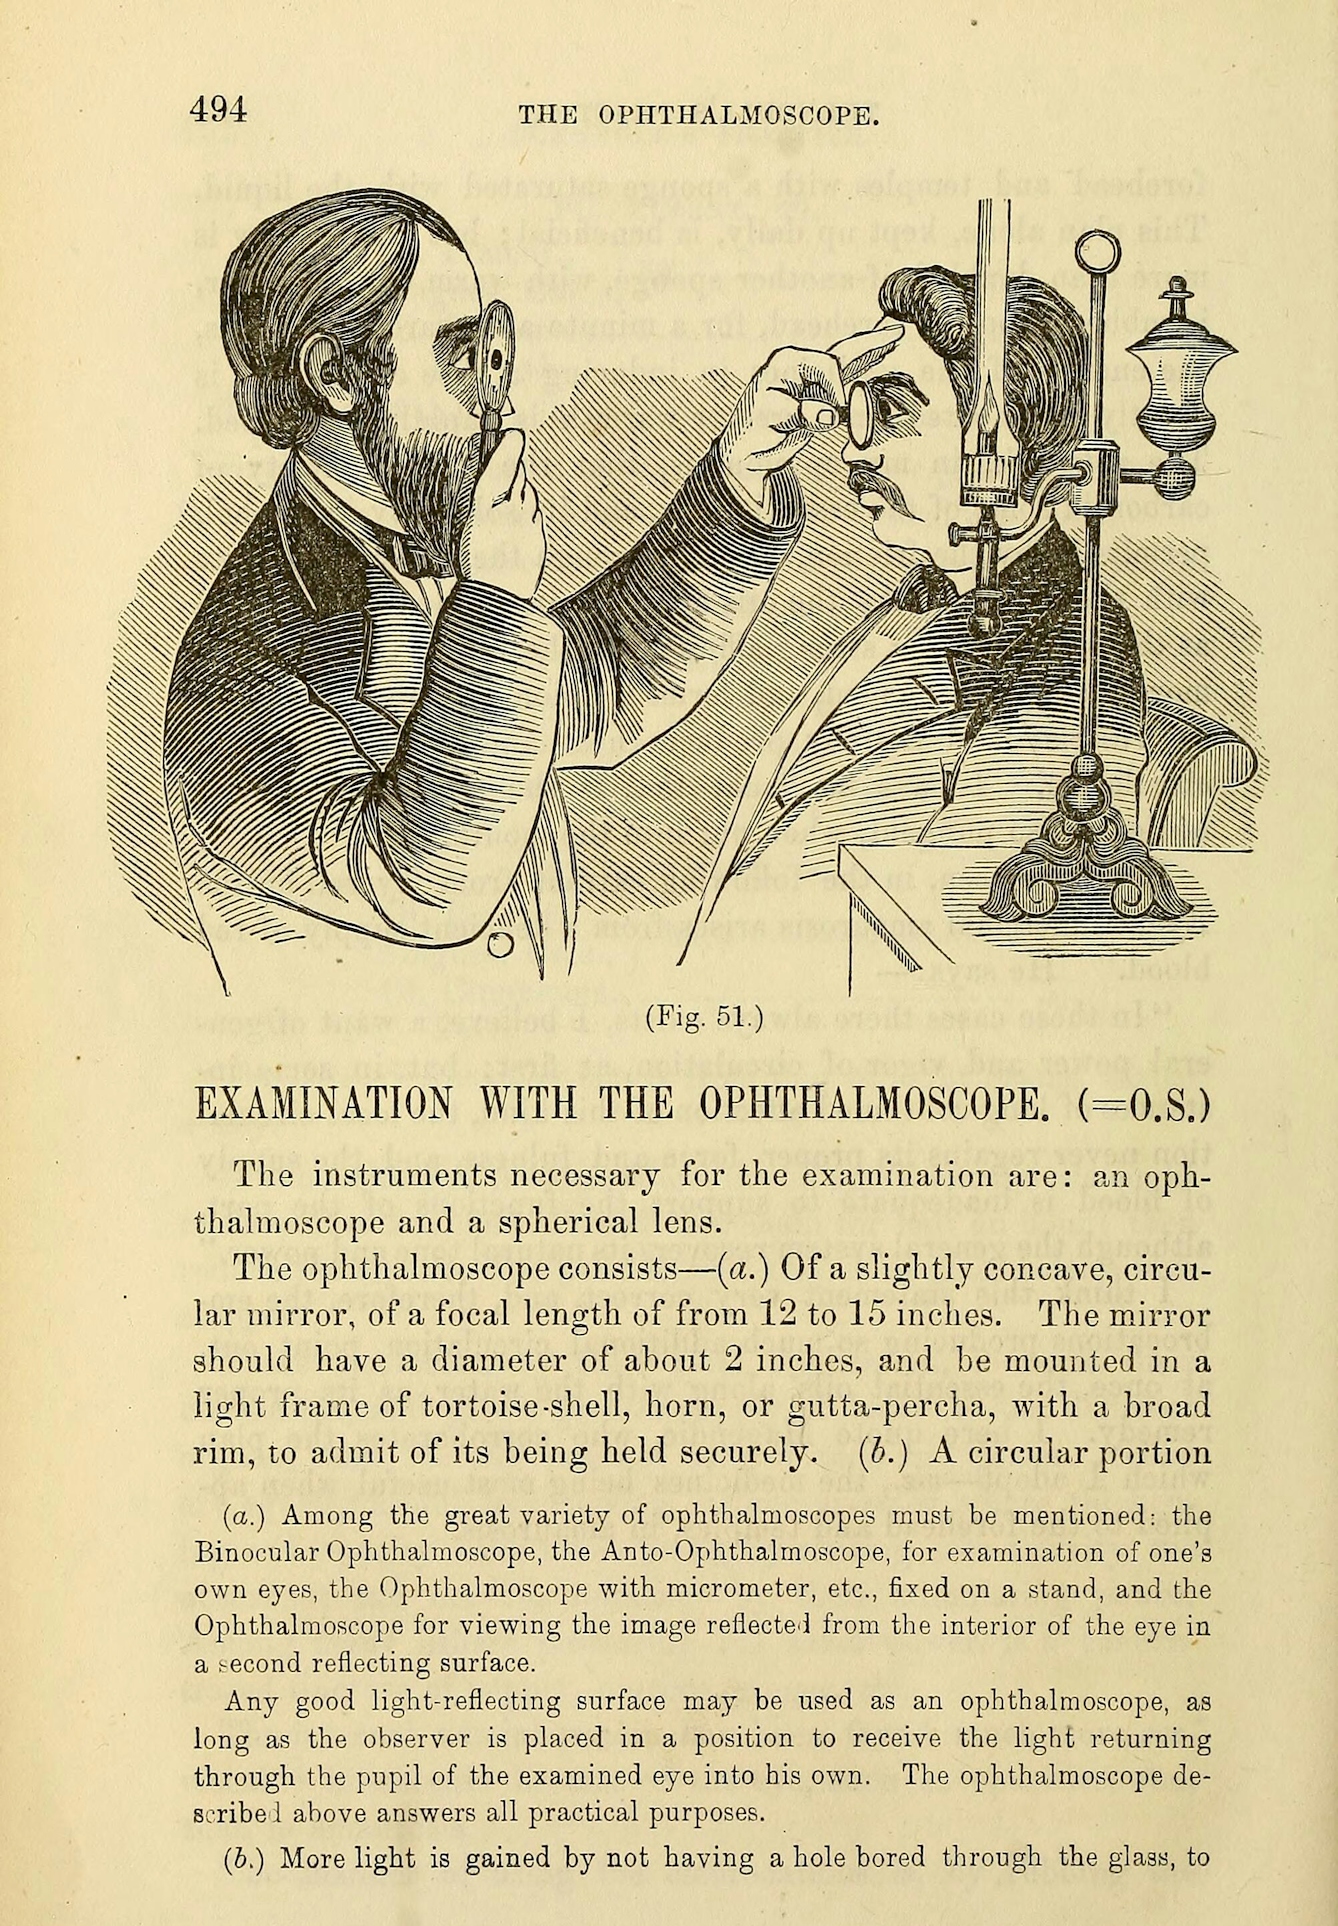 A page titled "Examination with the ophthalmoscope". The top half of the page is a line engraving of a bearded 19th century man holding an ophthalmoscope to his eye with one hand and a lens with a handle in the other hand. The lens is help up to the eye of another seated man in front of him. The bearded man looks through the the ophthalmoscope and lens into the other man's eye. Beside them on a desk is a paraffin or oil fuelled light. The lower half of the page is a detailed description of the ophthalmoscope and it's function.